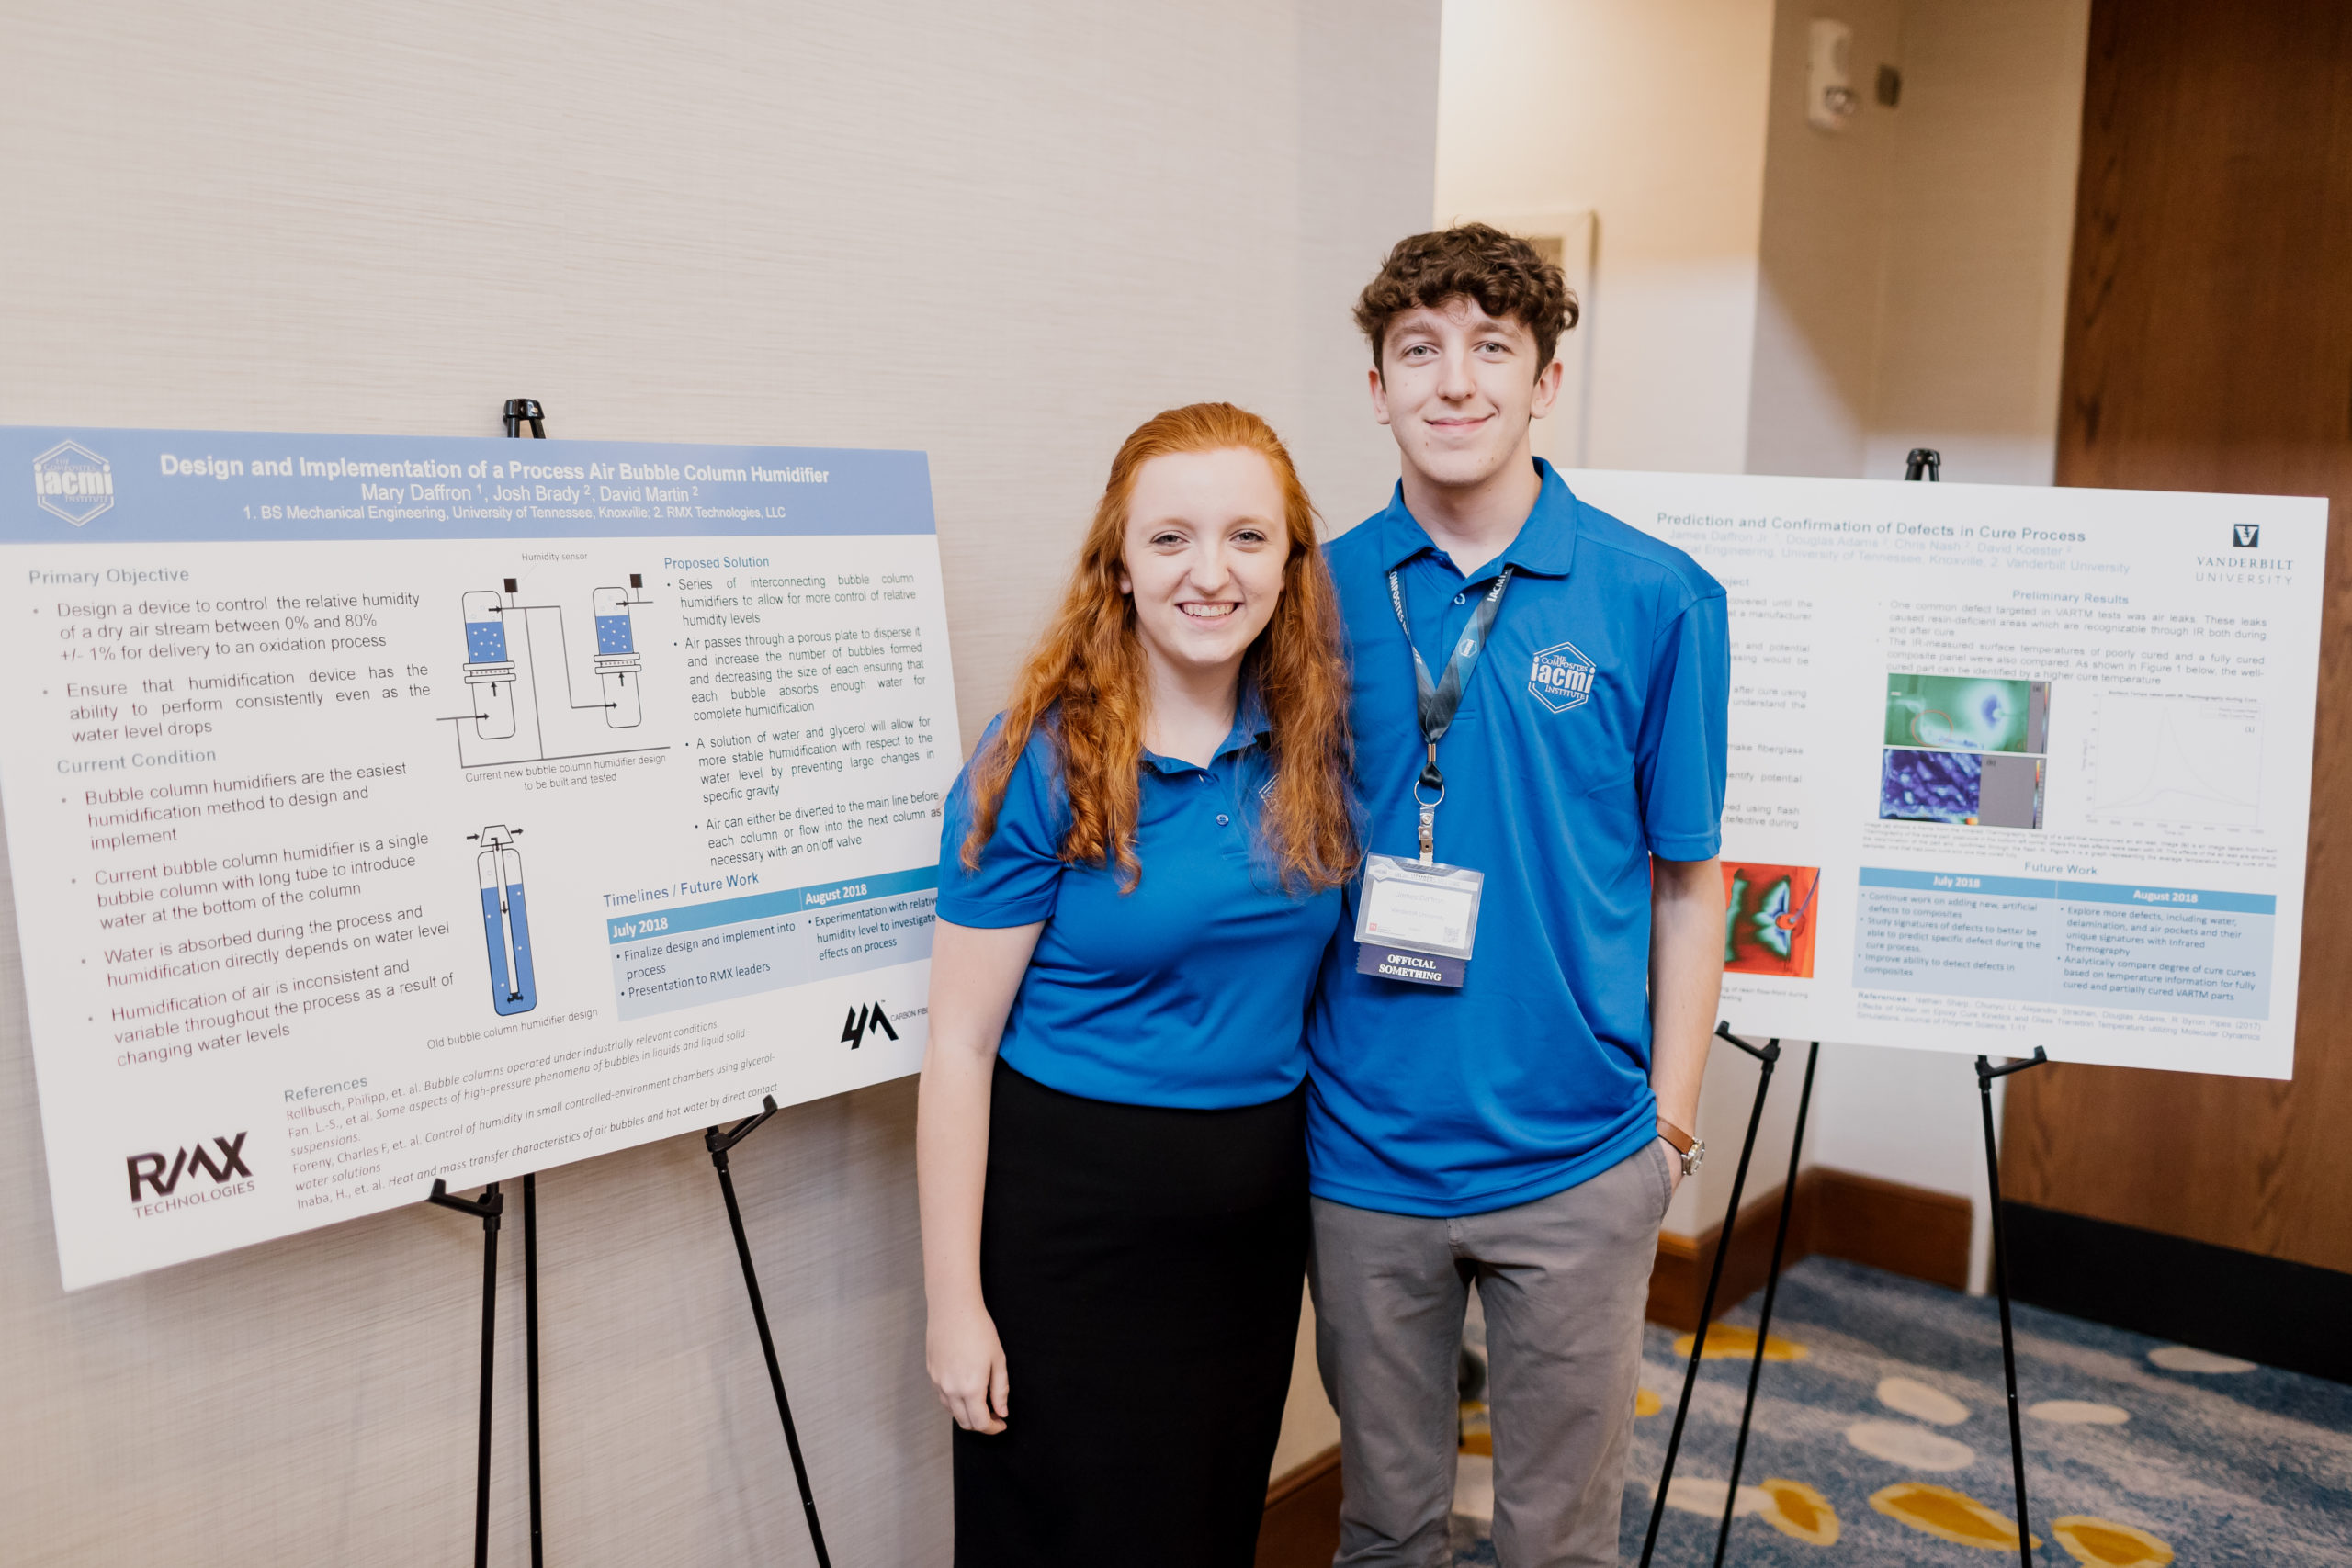 Young man and woman standing together in front of presentations